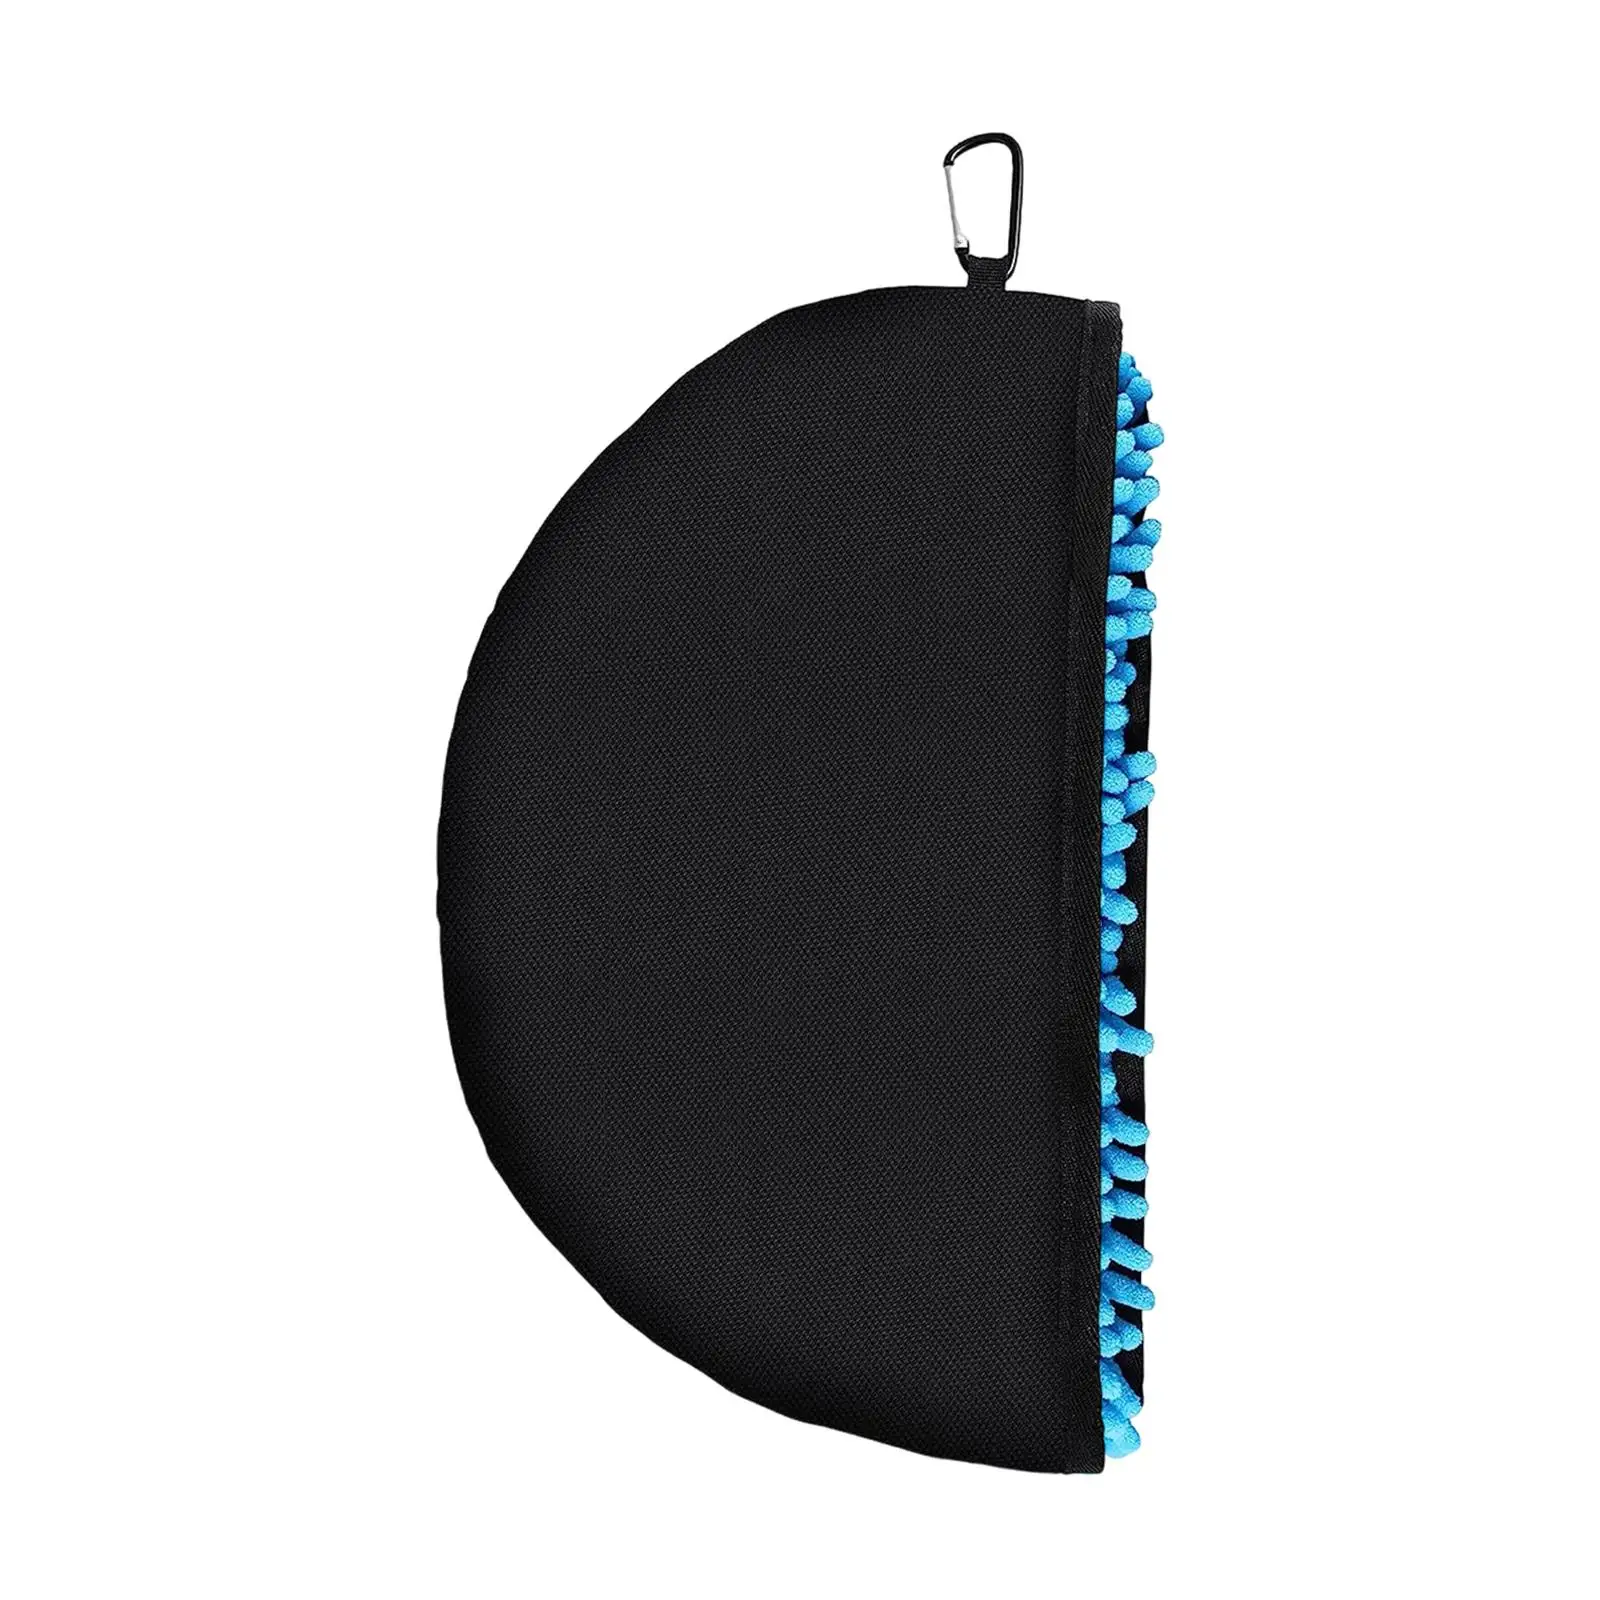 Disc Golf Cleaning Tool Disc Golf Bag Target Accessories Tote Cleaning Towel Case for Golf Course Travel Outdoor Beginner Sports